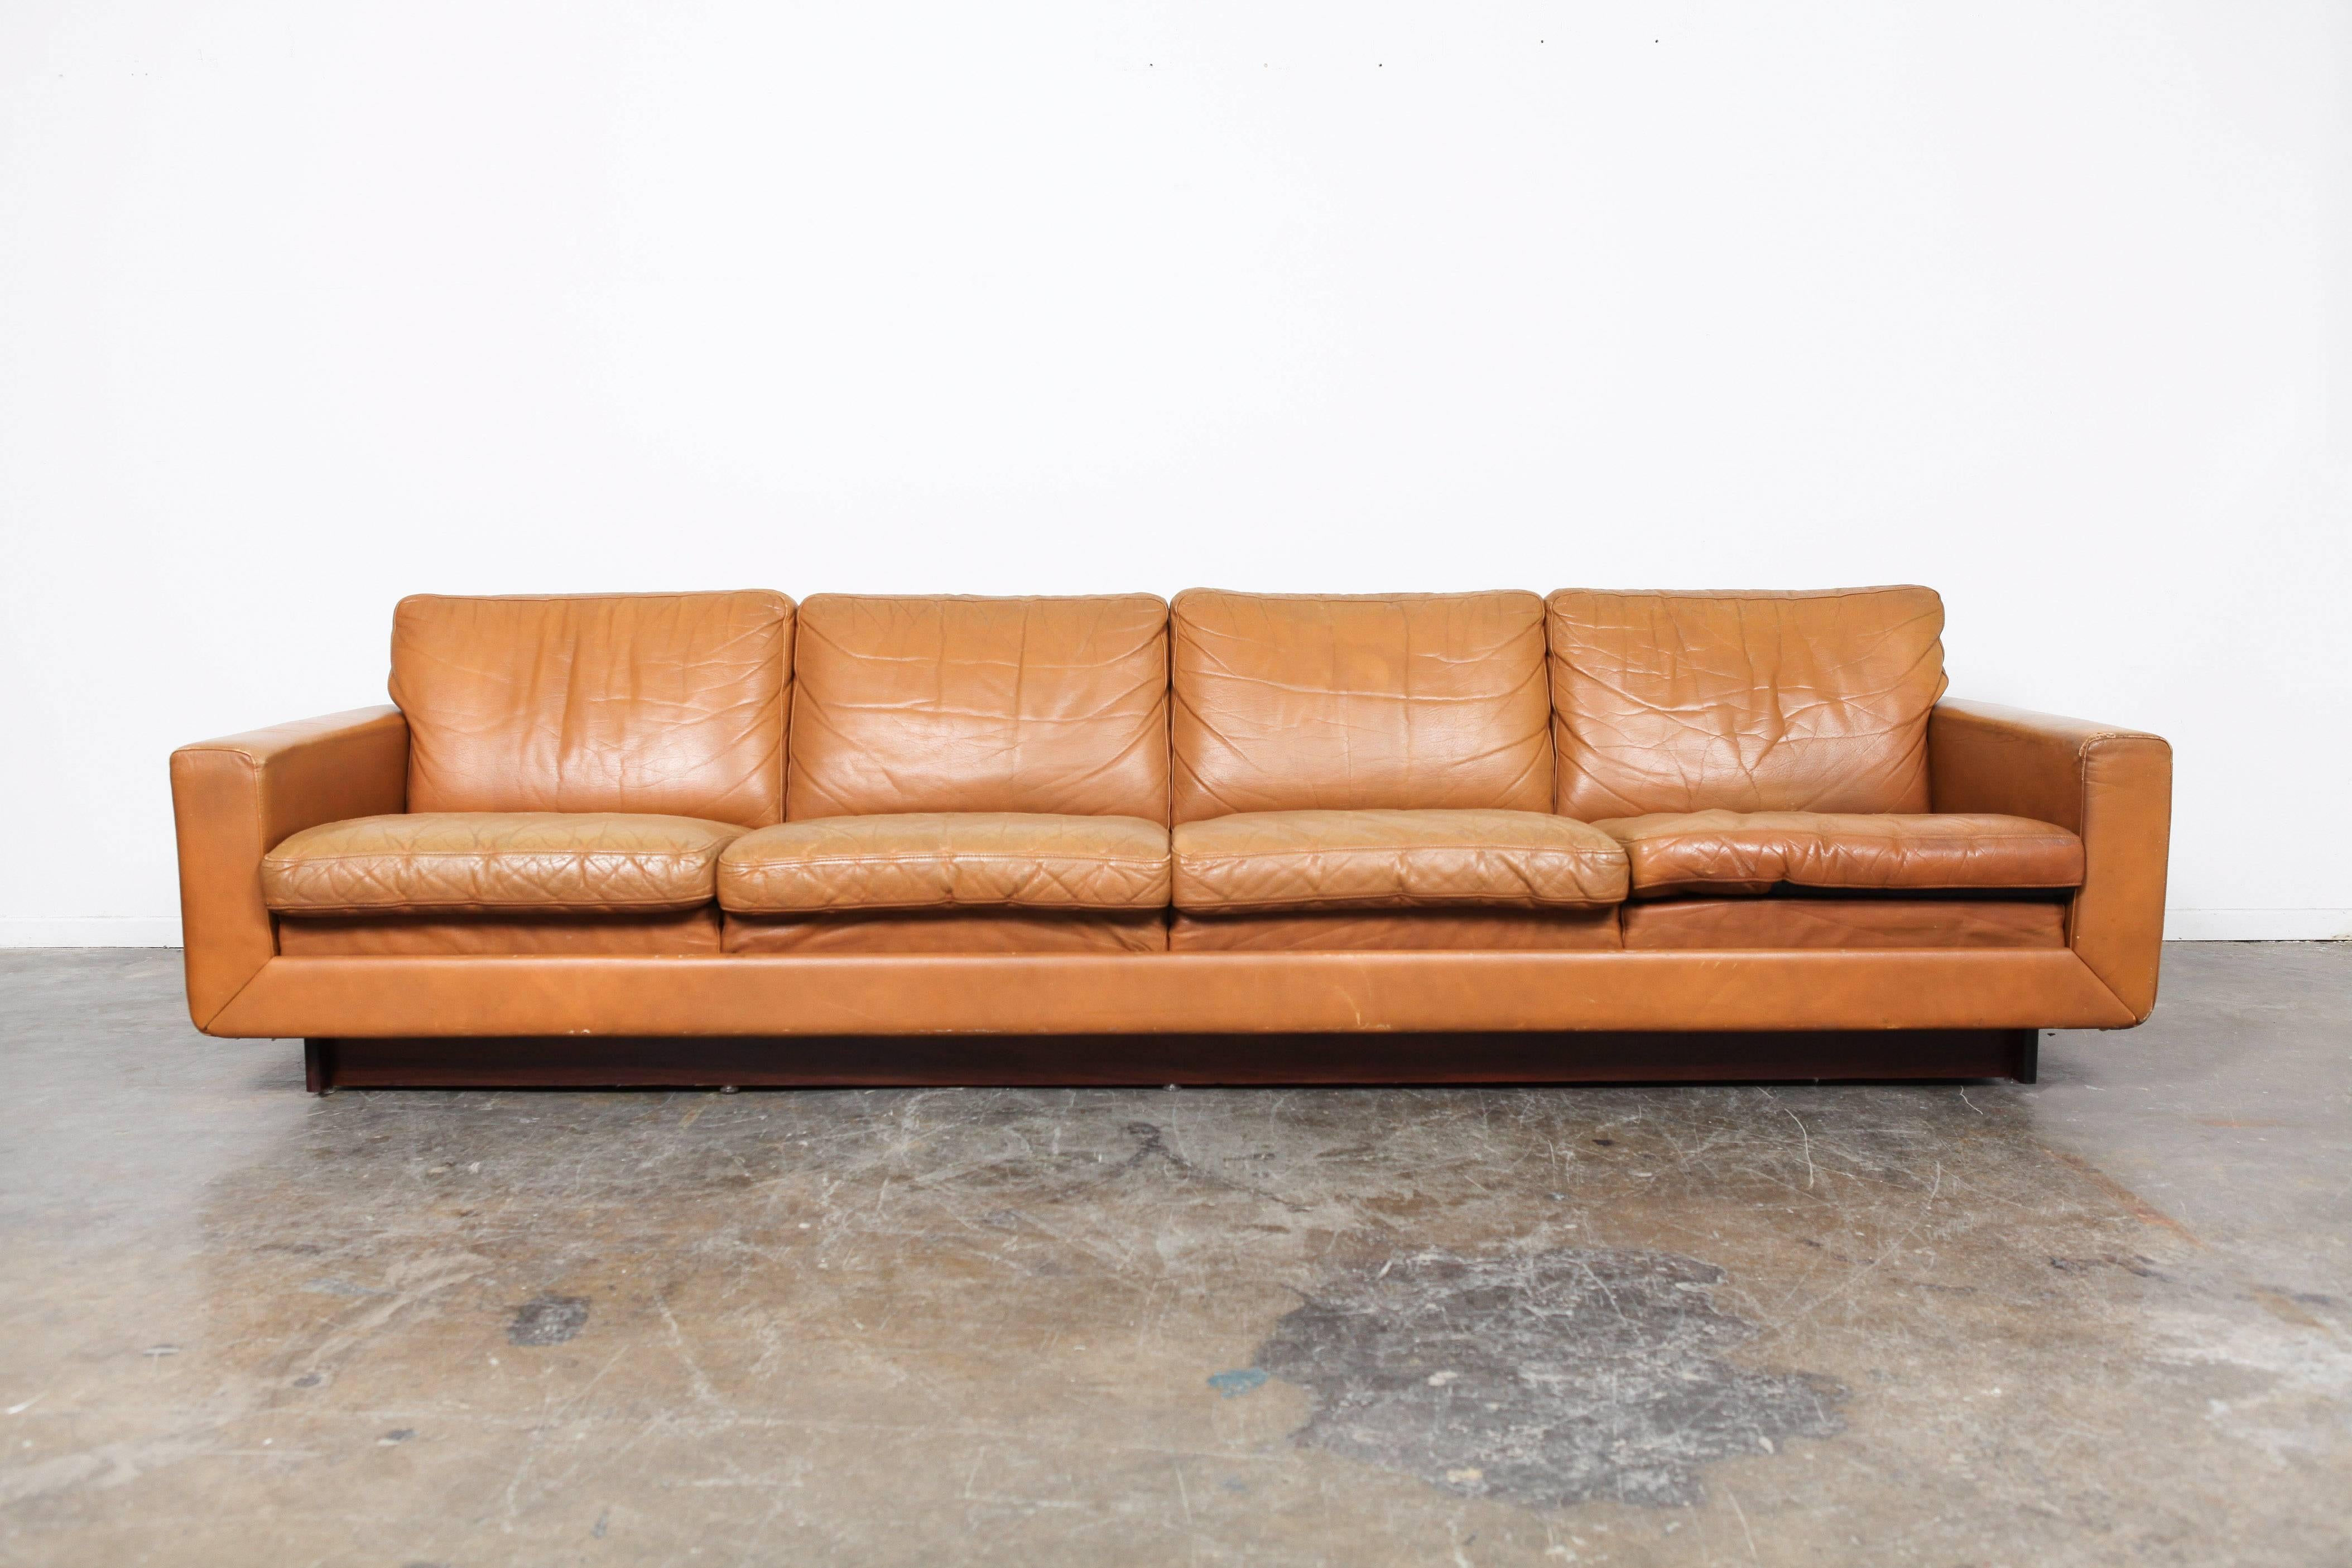 Classic Danish Mid-Century Modern sofa in camel colored leather with loose back and seat cushions. This piece rests on a wooden plinth base and has excellent patina throughout.